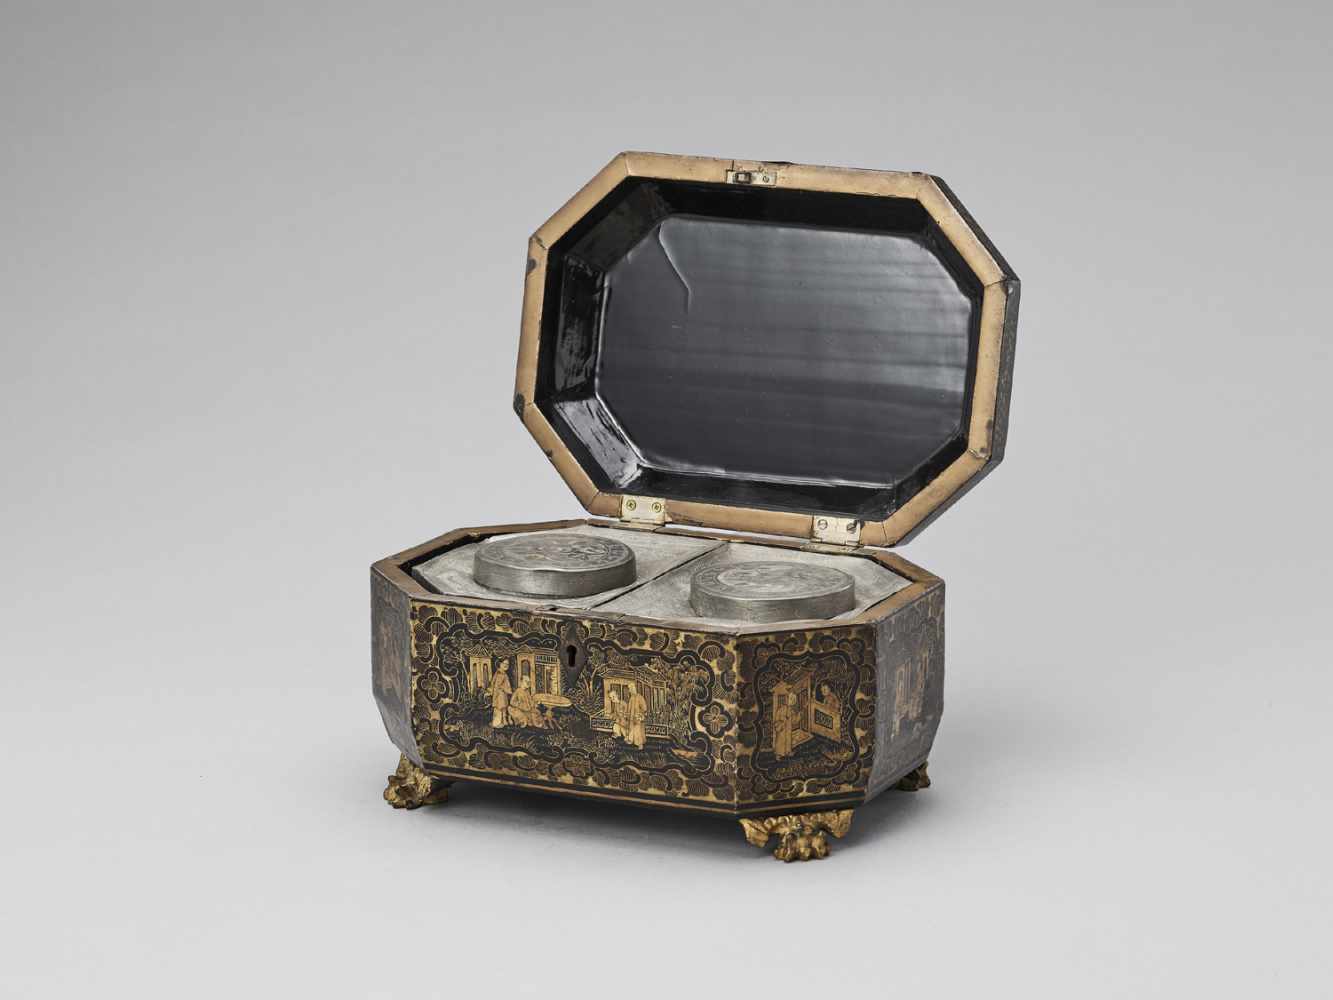 A CANTON LACQUER HEXAGONAL TEA CADDY WITH ORIGINAL TEA CONTAINERS, QING - Image 2 of 8